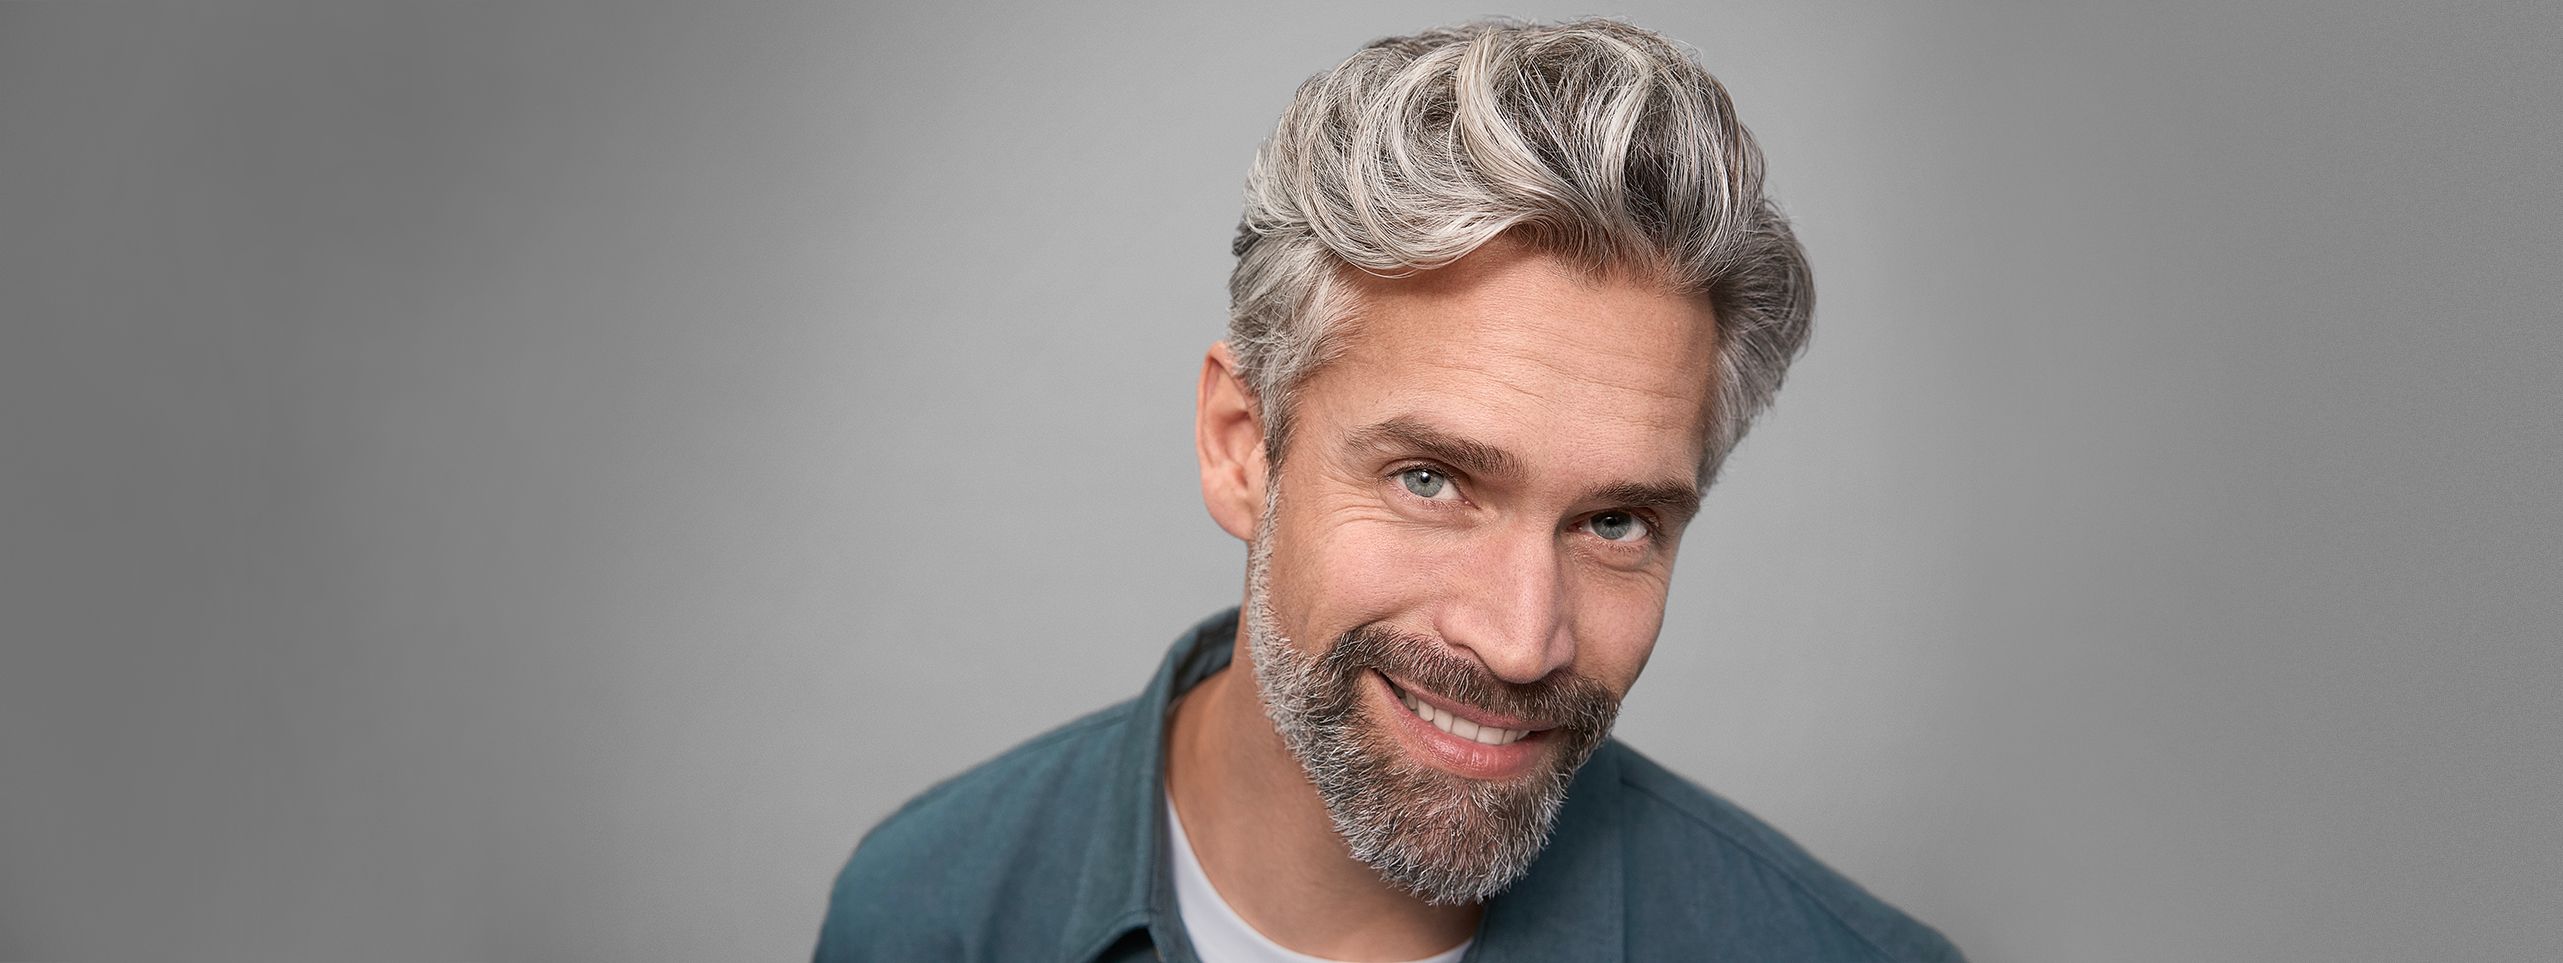 When men with gray hair look sexy